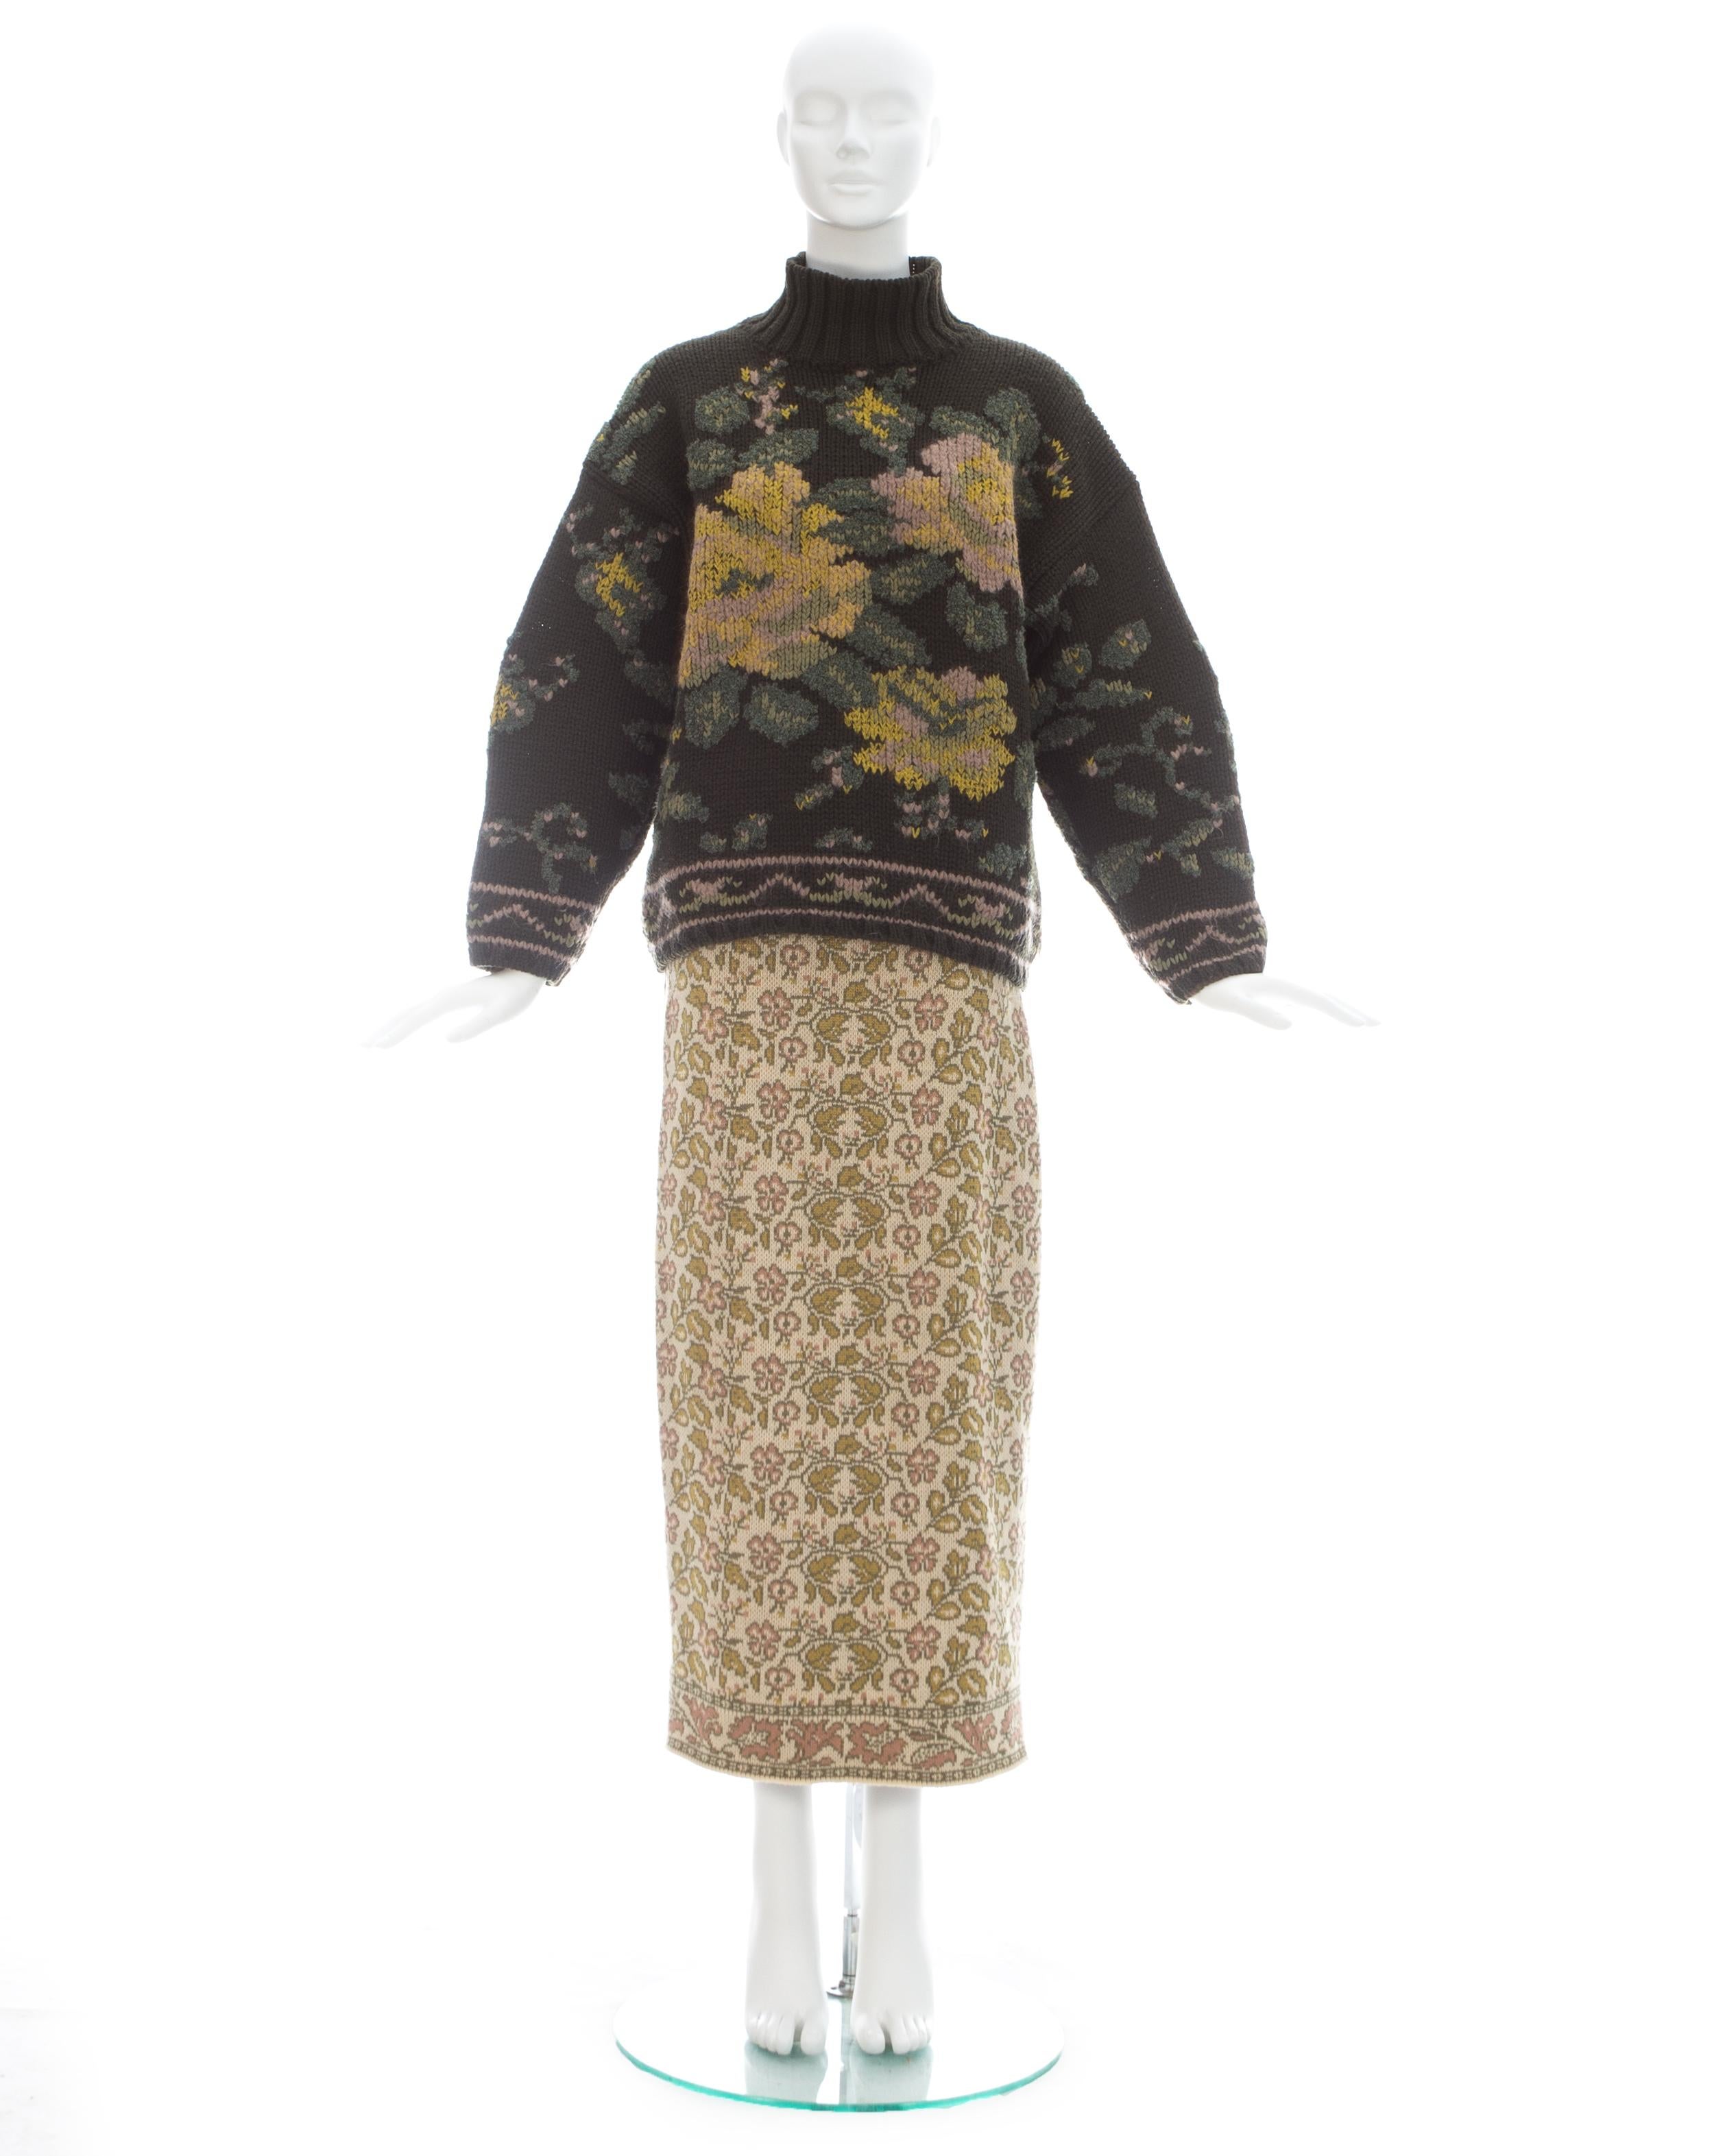 Jean Paul Gaultier; Tapestry style floral knitted wool turtle neck sweater and skirt set

Fall-Winter 1984